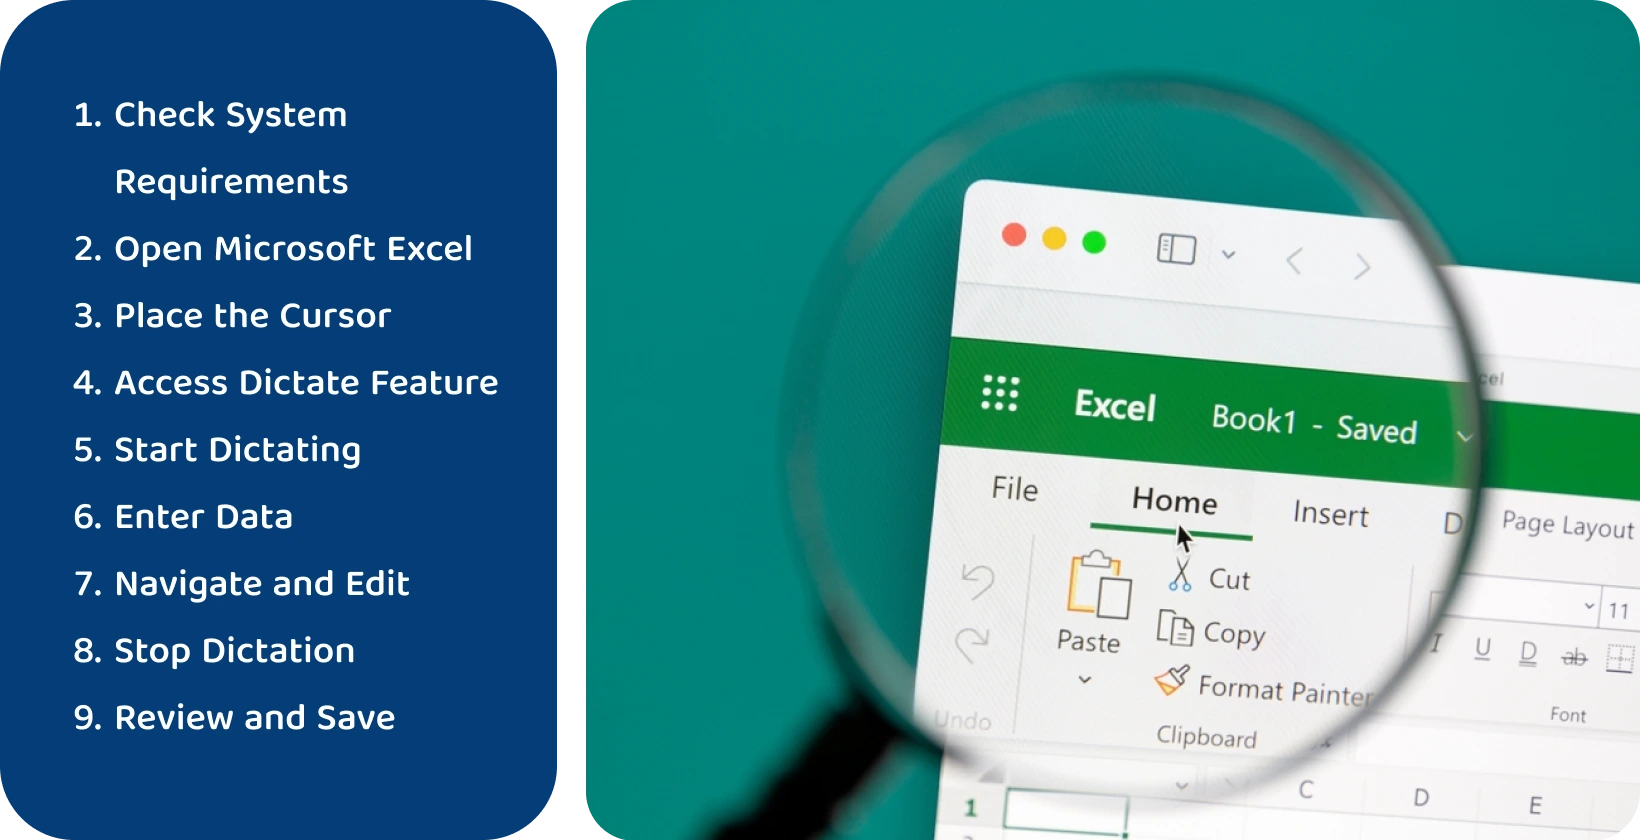 Use the dictate function in Excel to transcribe speech to text efficiently, as shown through the magnified interface.